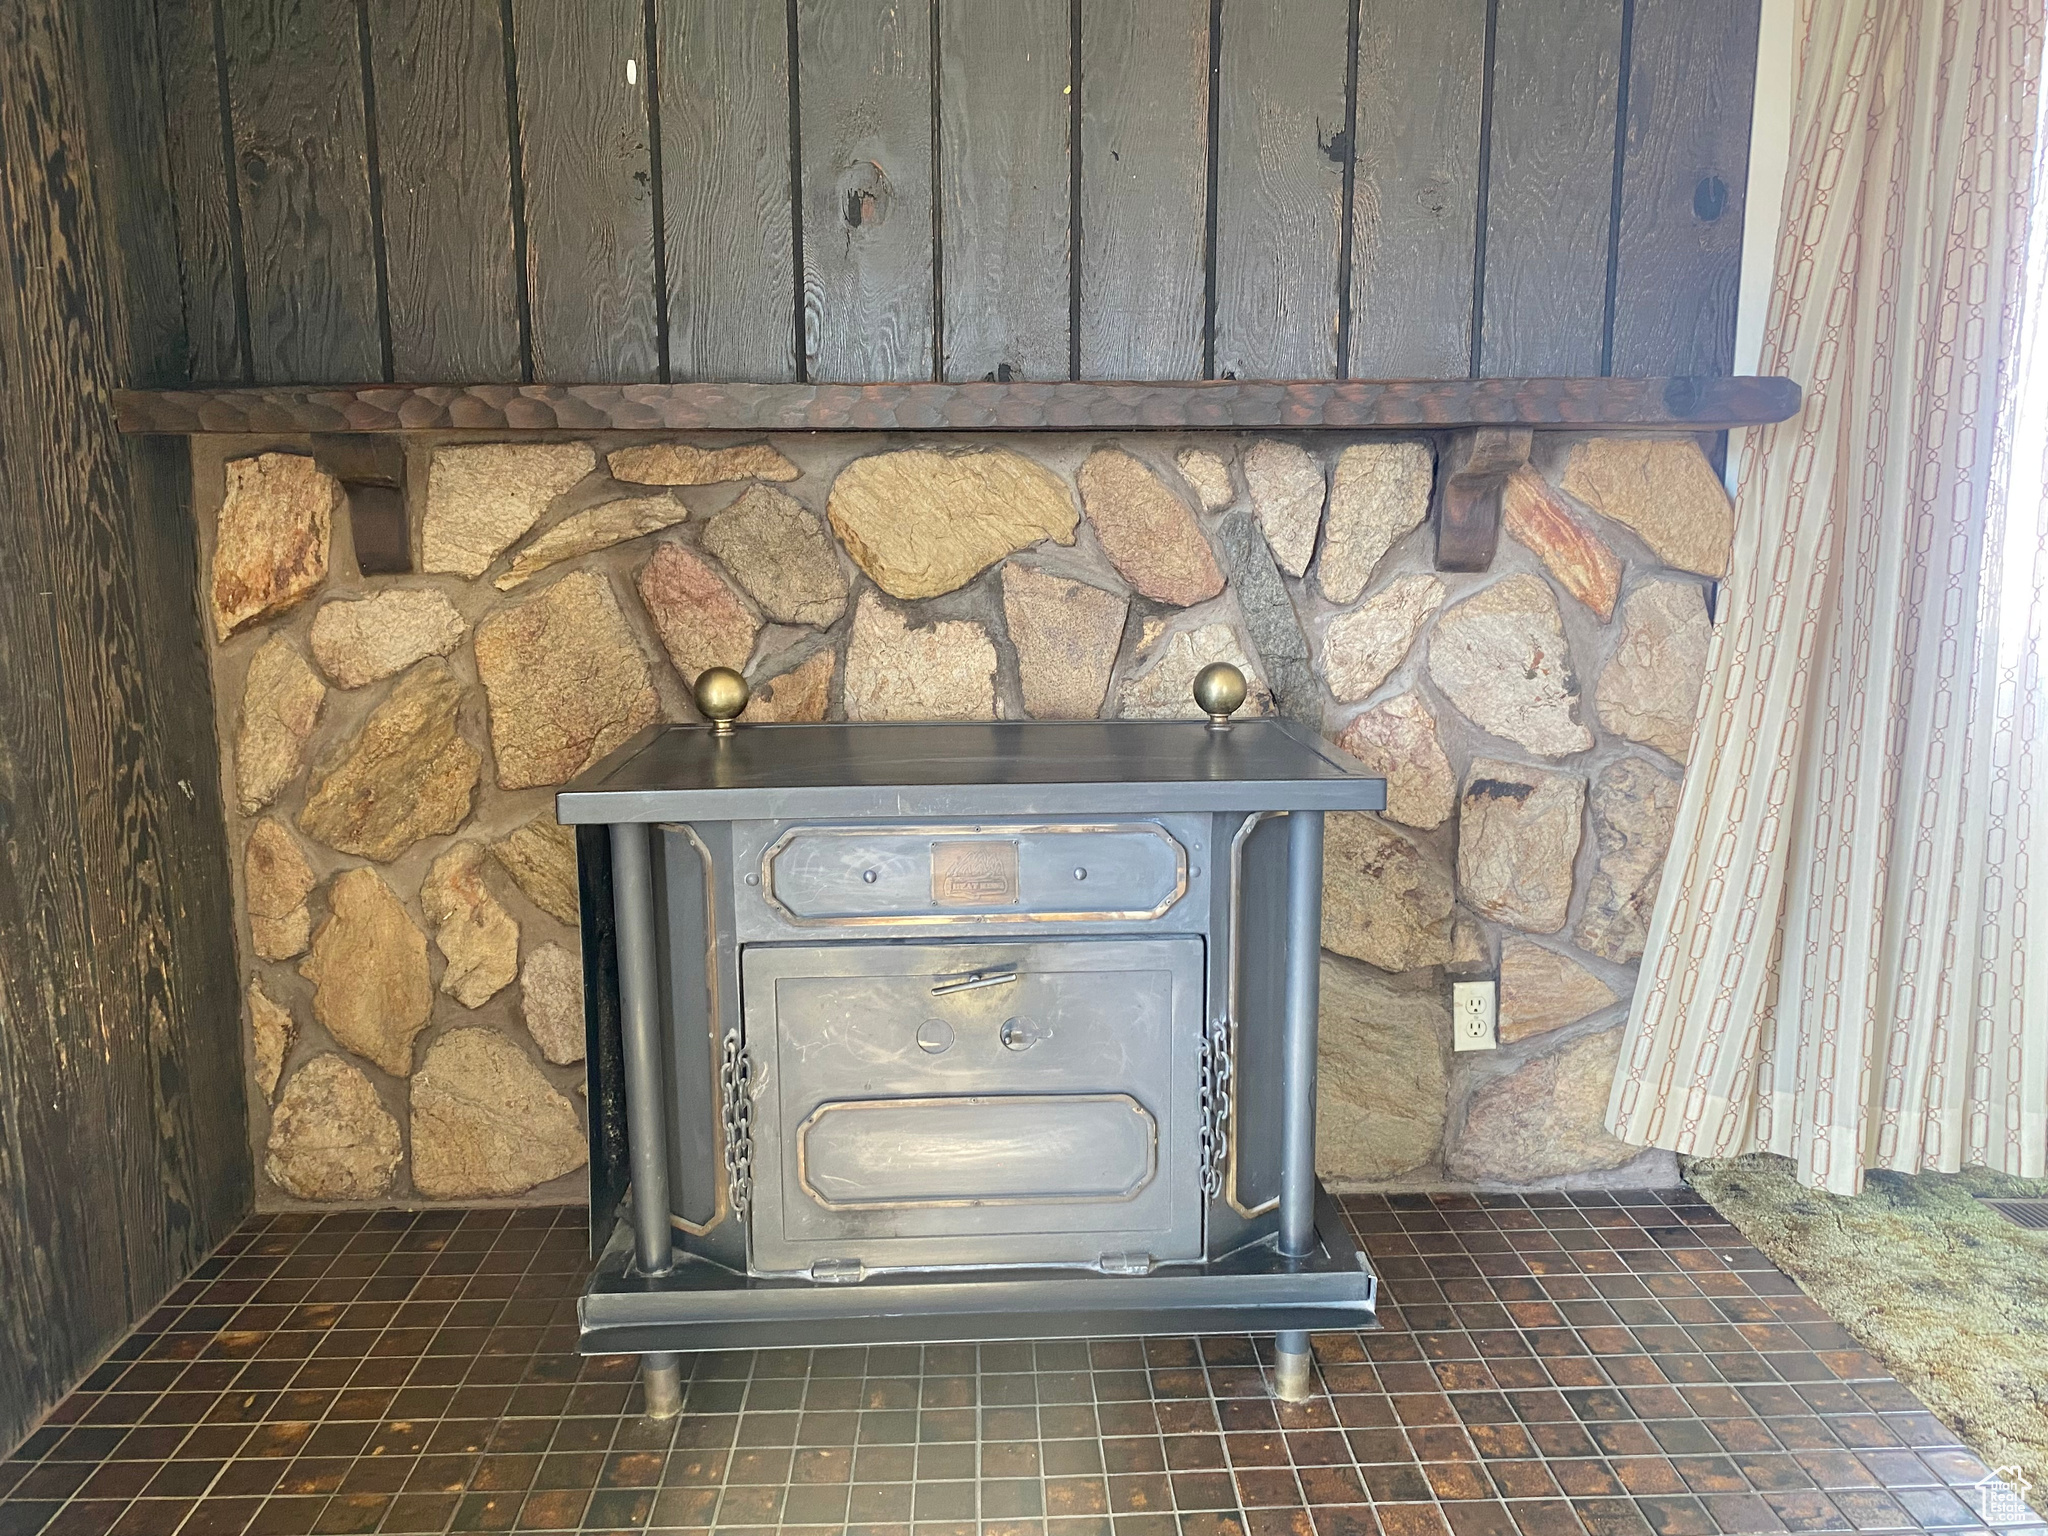 Exterior details featuring a wood stove and dark tile floors